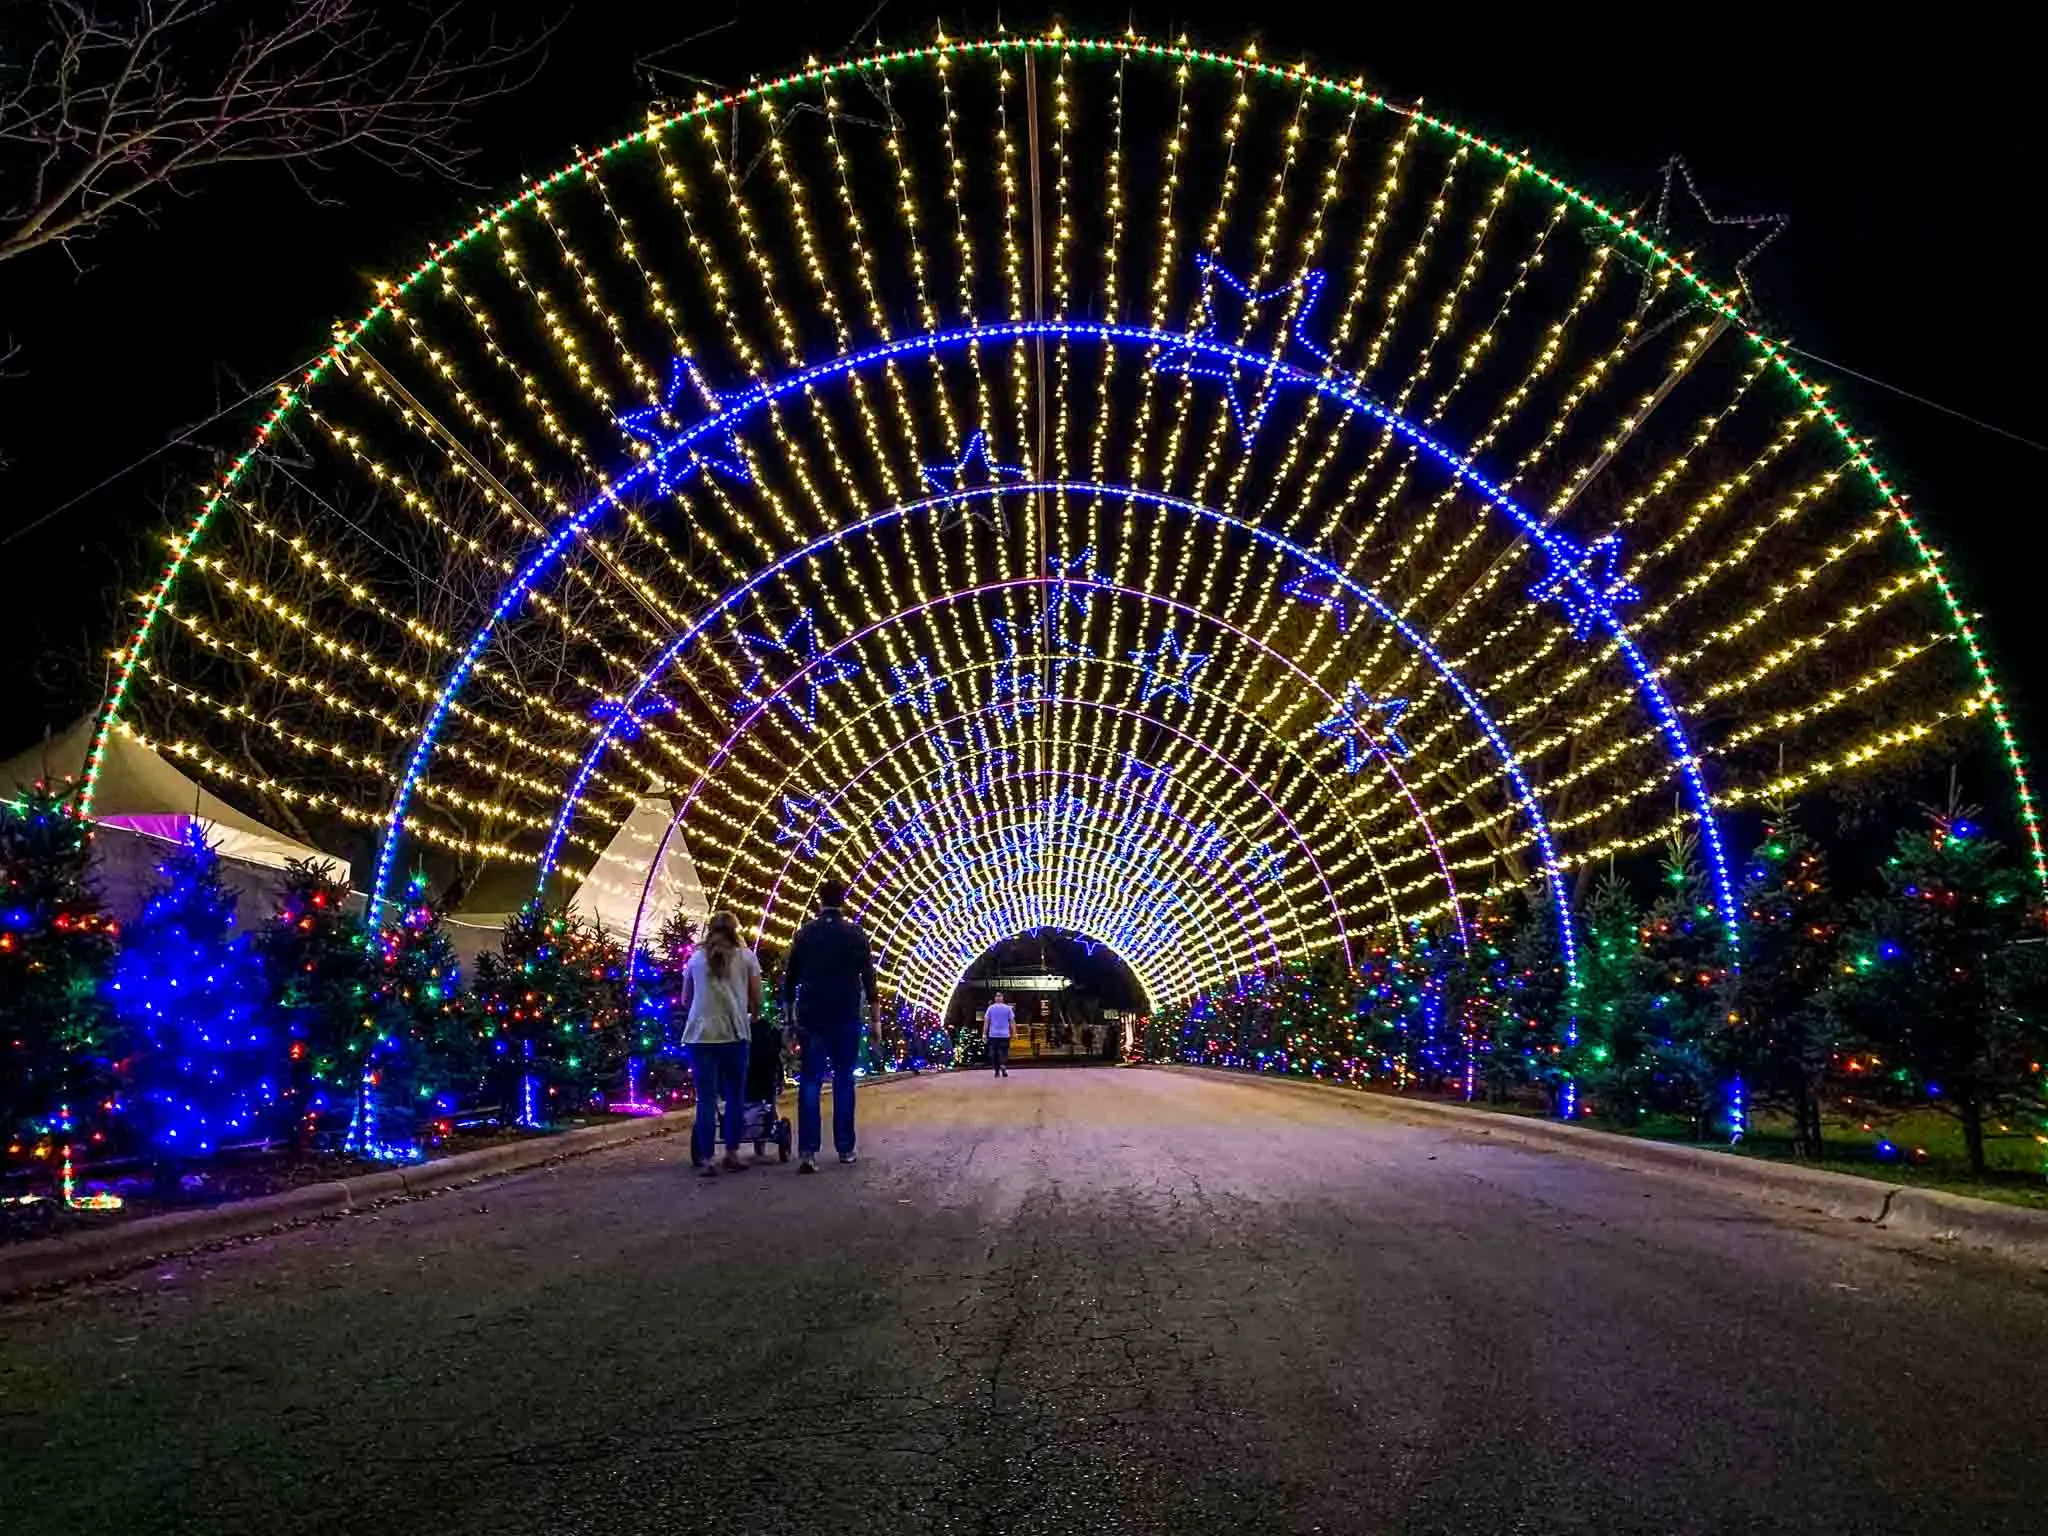 People walking through a tunnel of Christmas lights at night